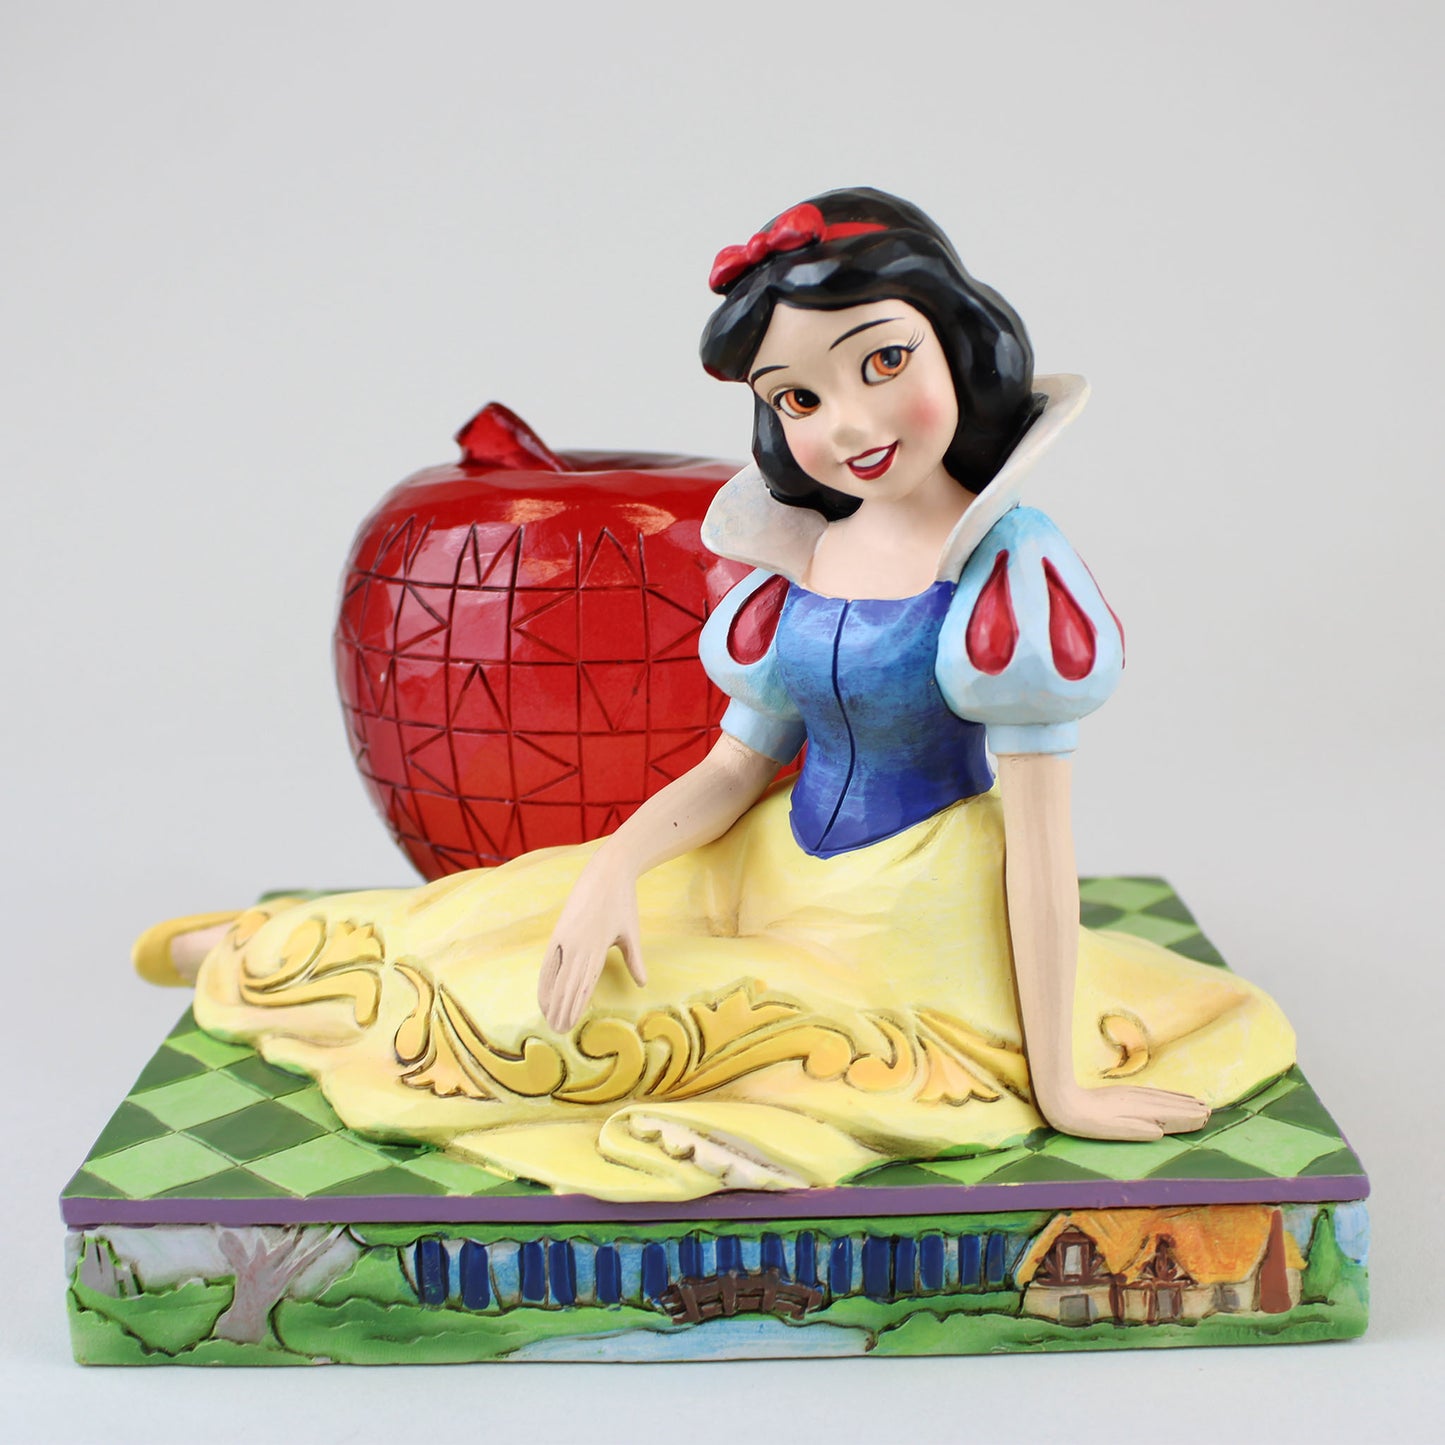 Snow White and Apple "A Tempting Offer" Jim Shore Disney Traditions Statue